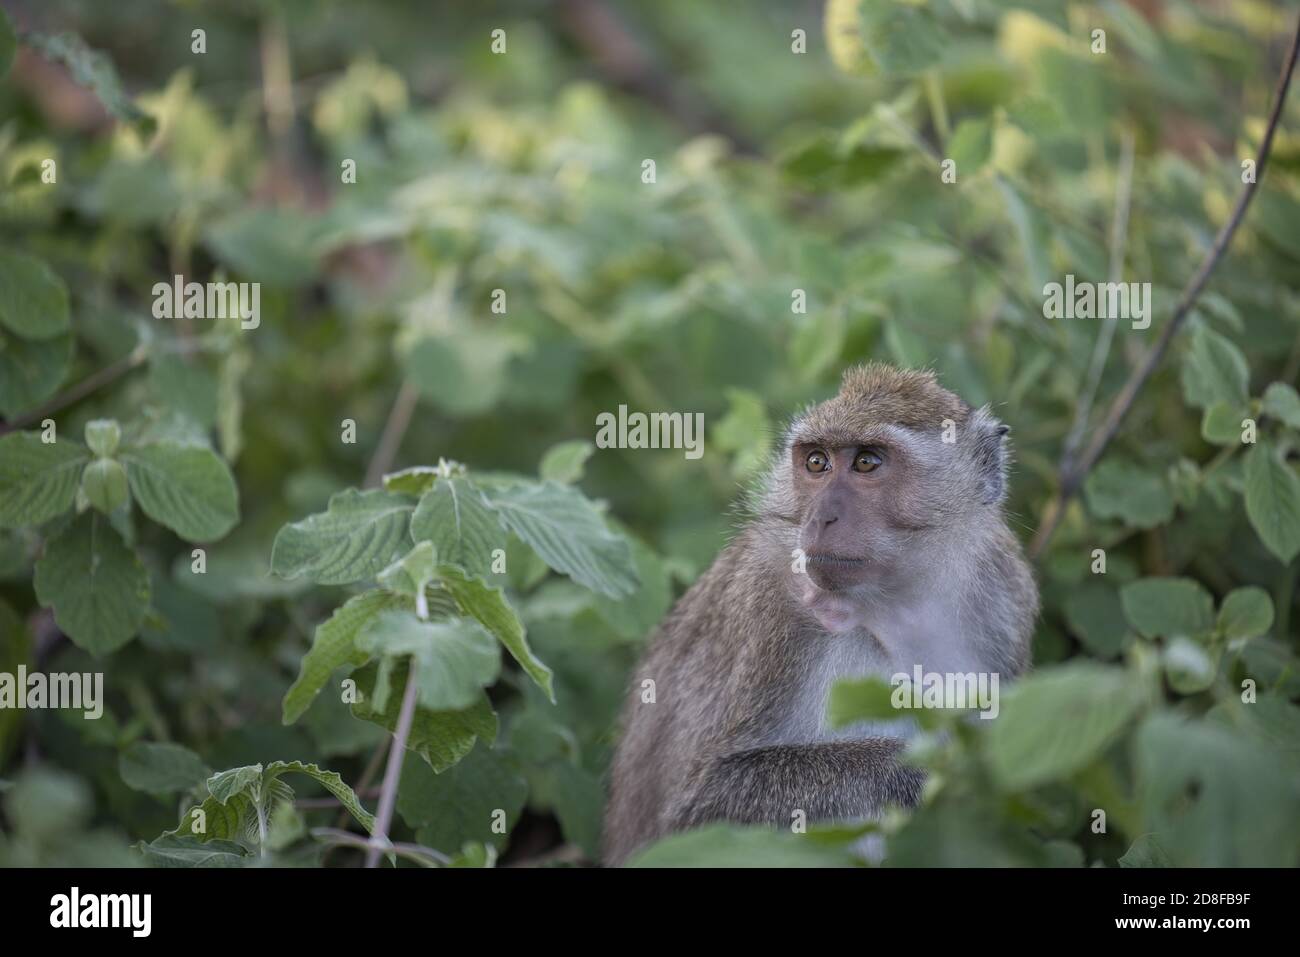 This unique photo shows a wild monkey sitting in a bush. its fur structure can be seen very well. Stock Photo